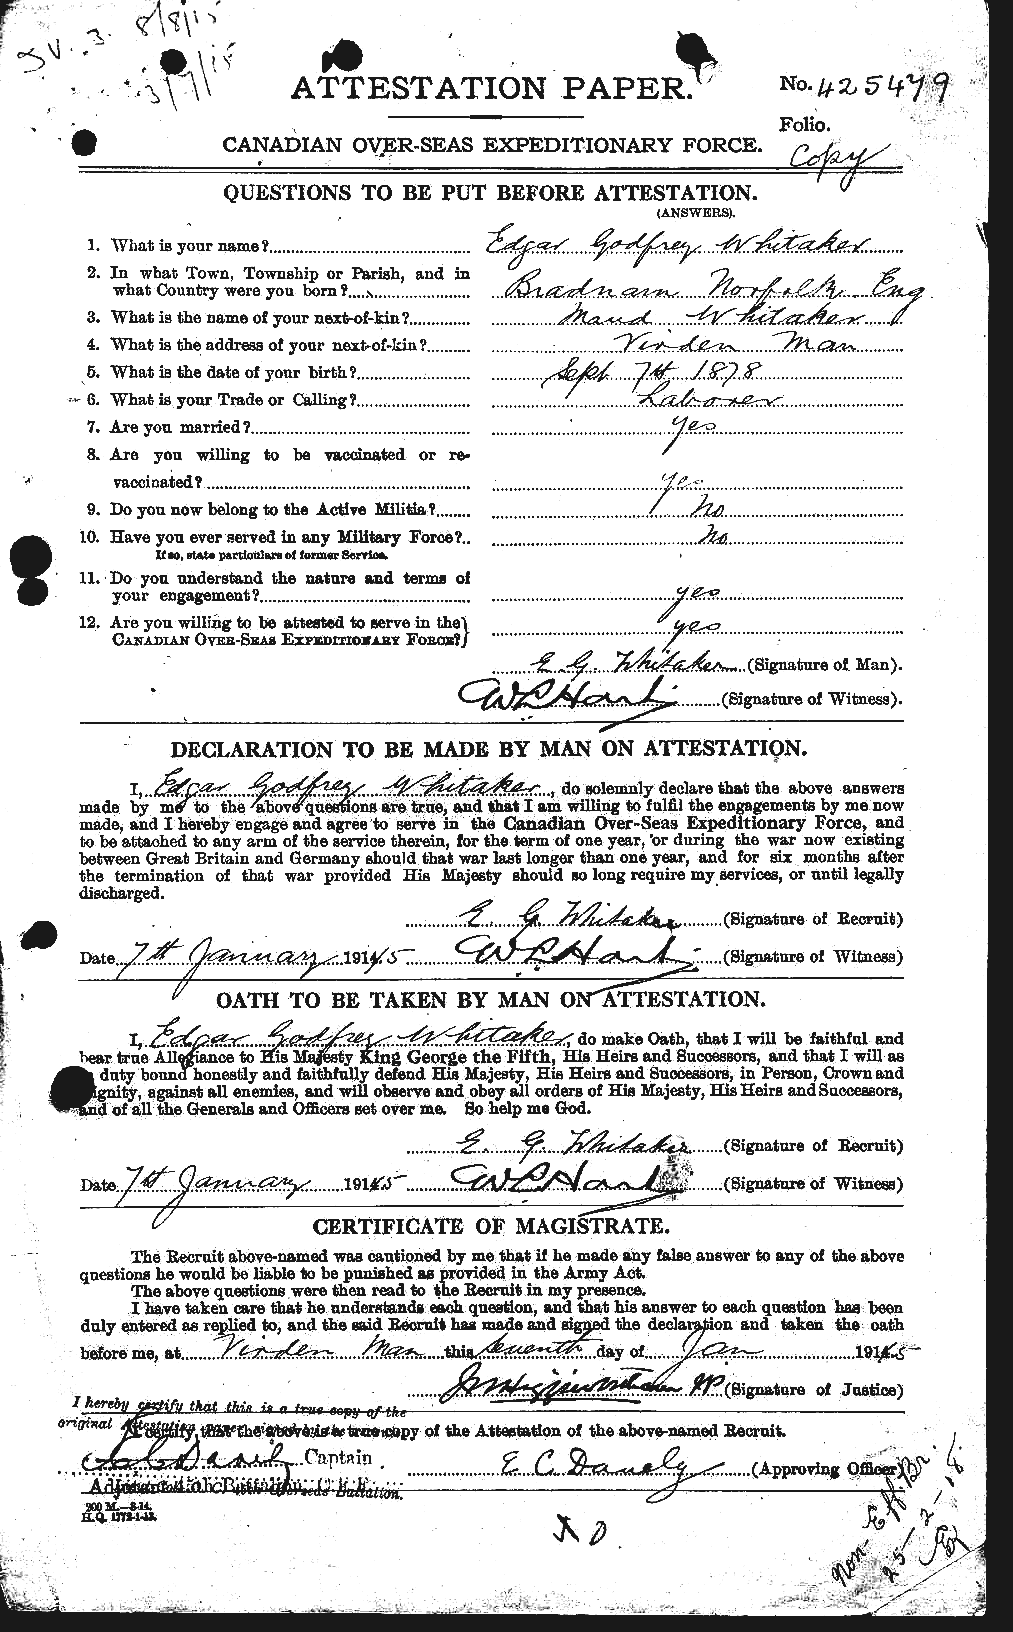 Personnel Records of the First World War - CEF 668814a